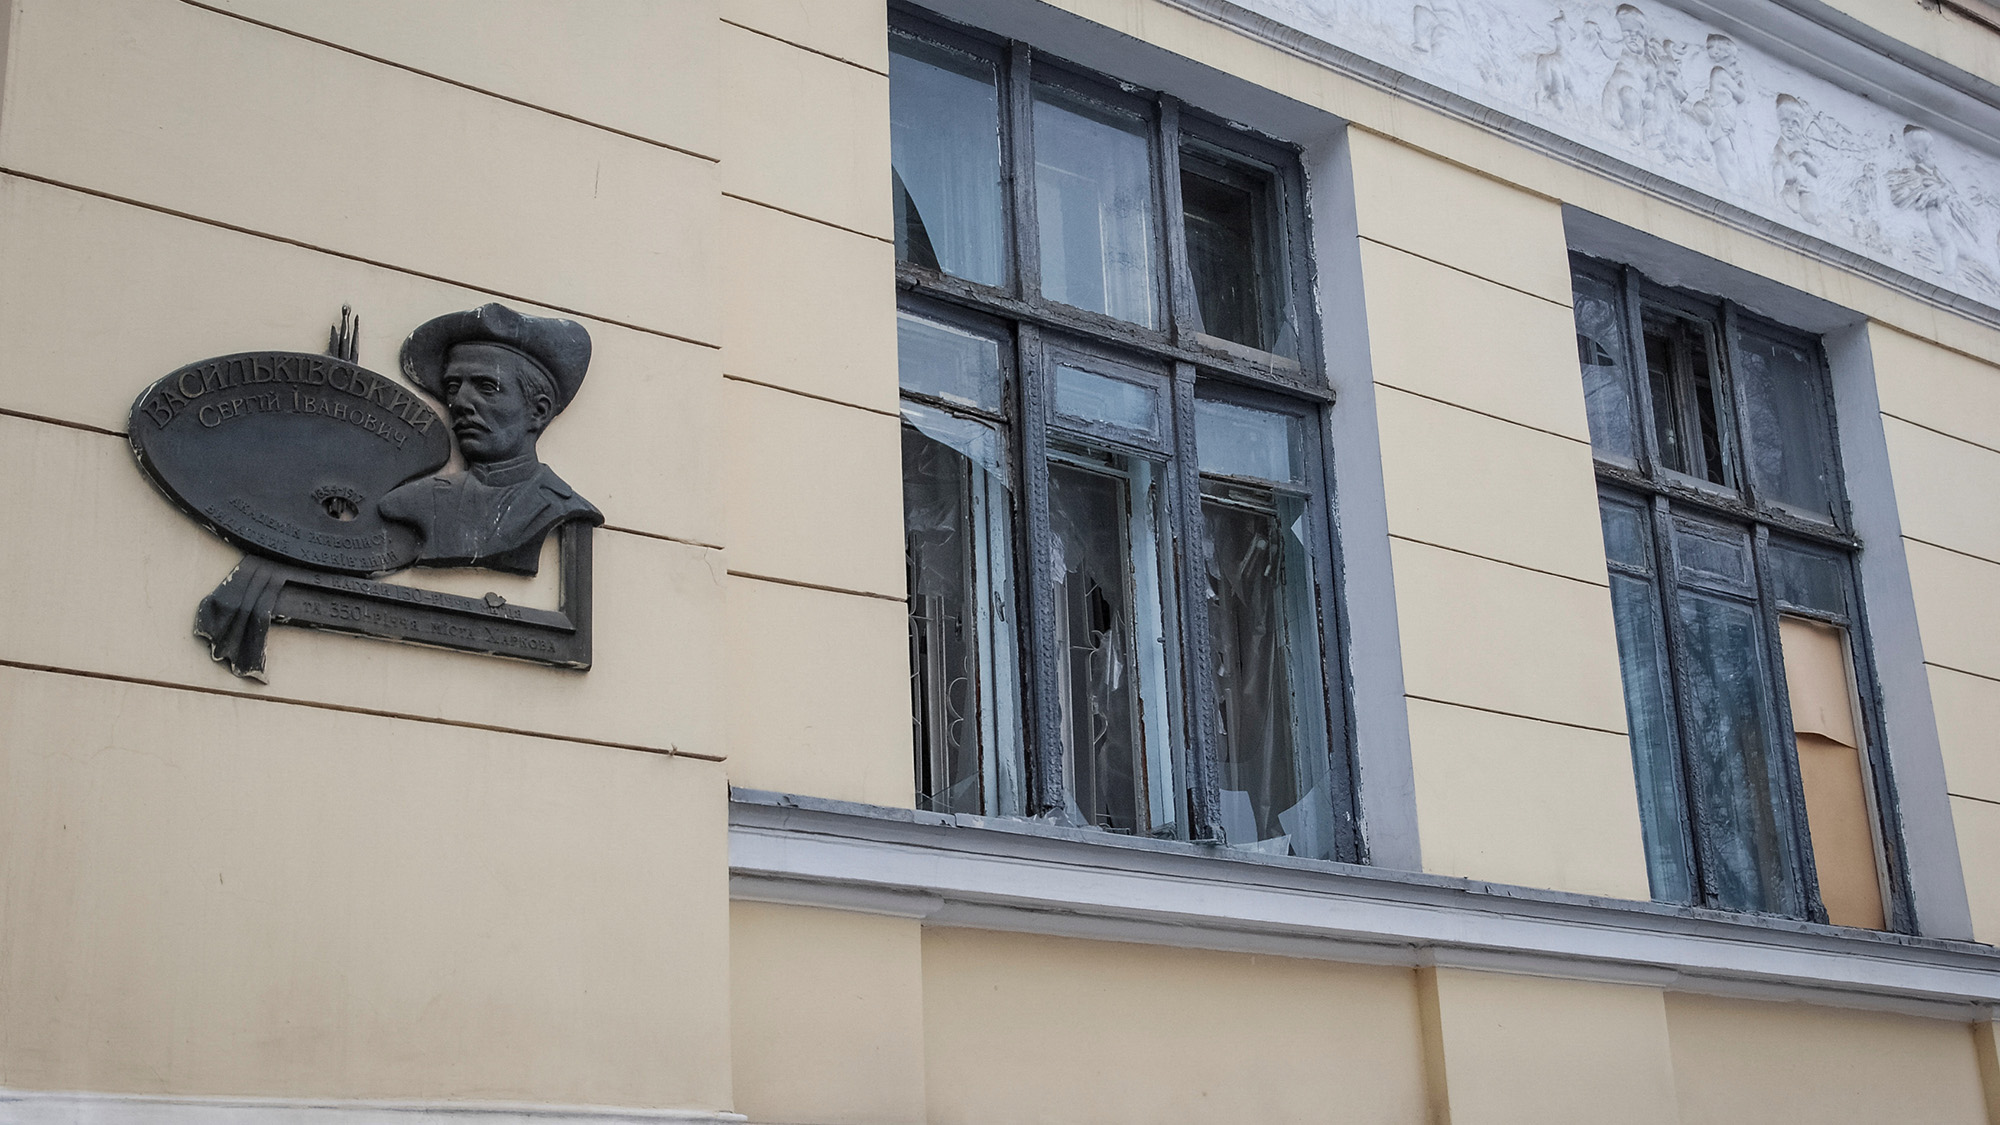 The Kharkiv Art Museum is seen damaged by shelling on March 8.